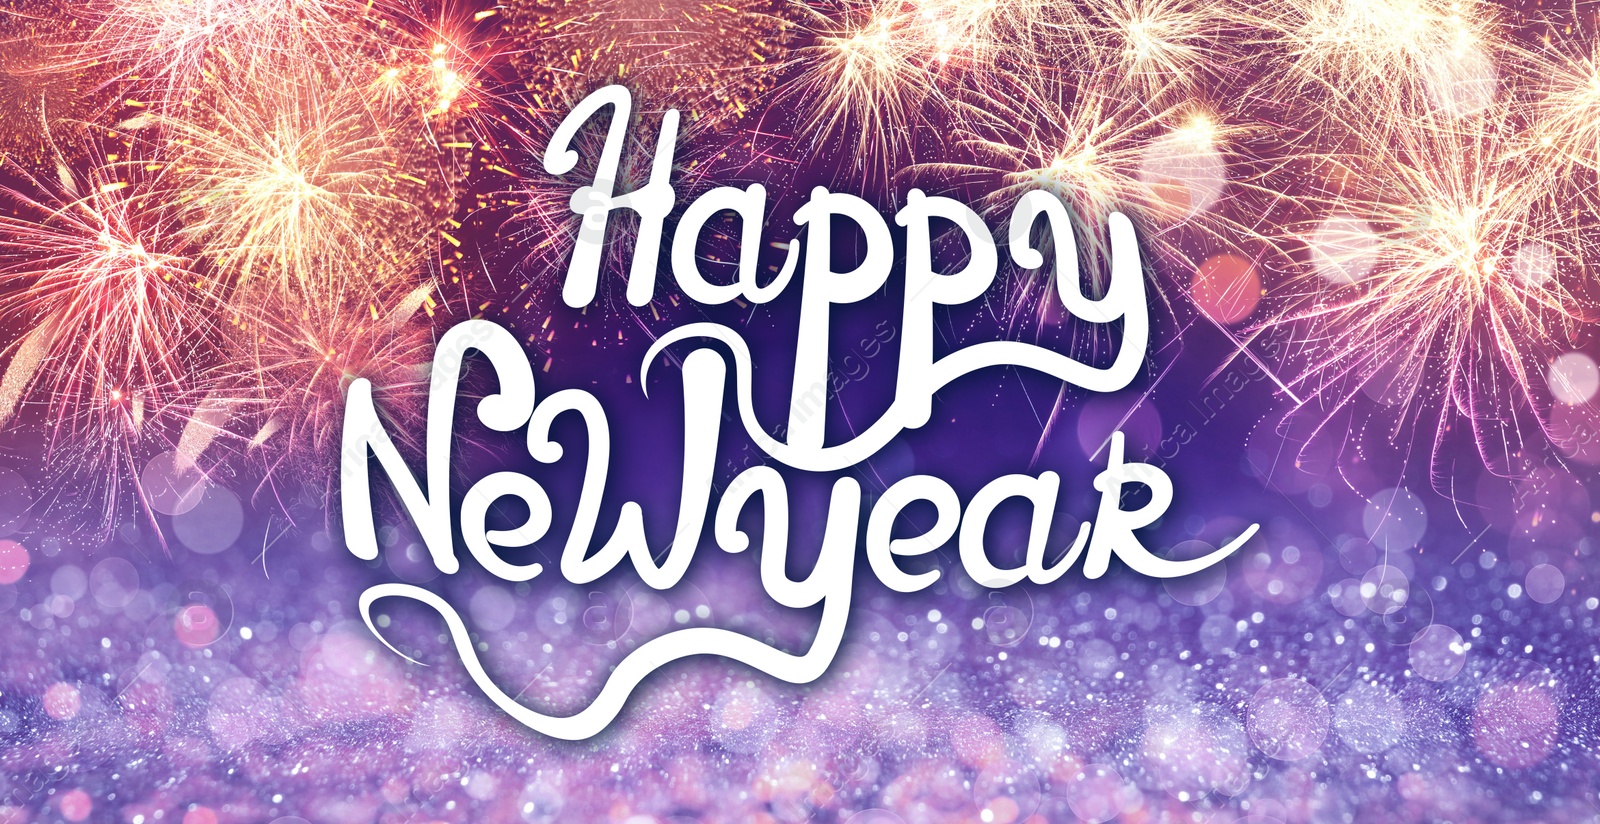 Illustration of Text Happy New Year on festive background with fireworks, bokeh effect